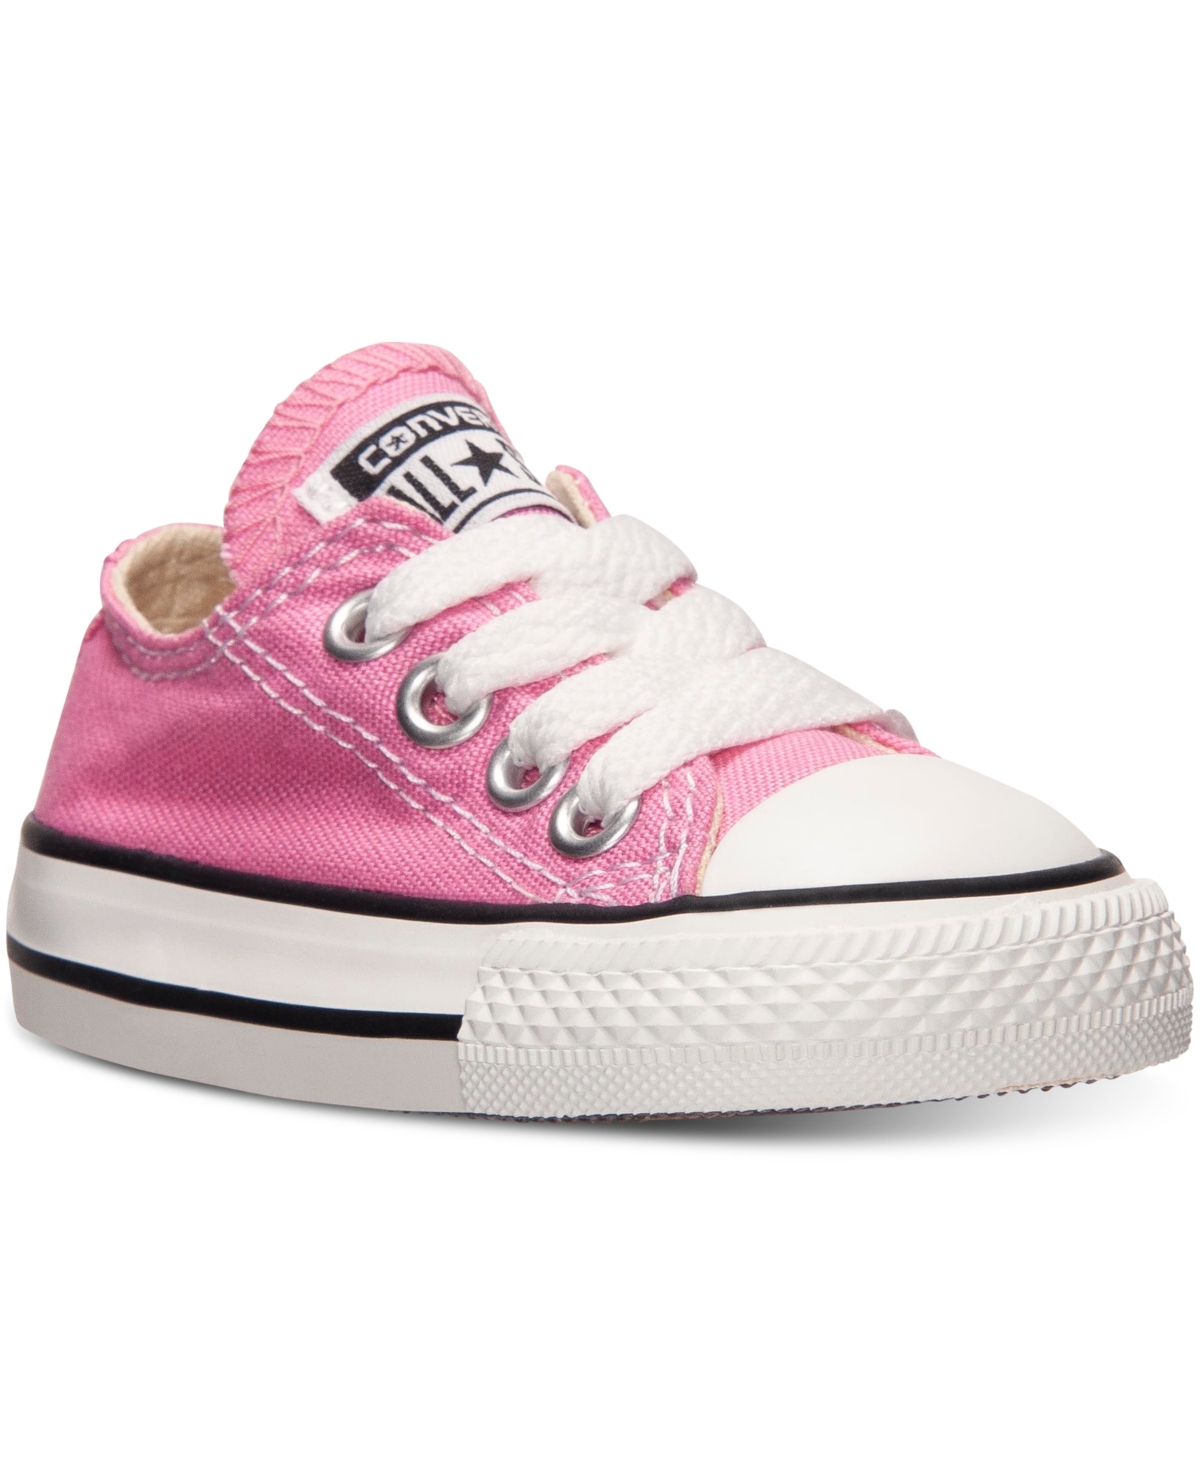 UPC 022866406369 product image for Toddler Chuck Taylor Original Sneakers from Finish Line | upcitemdb.com